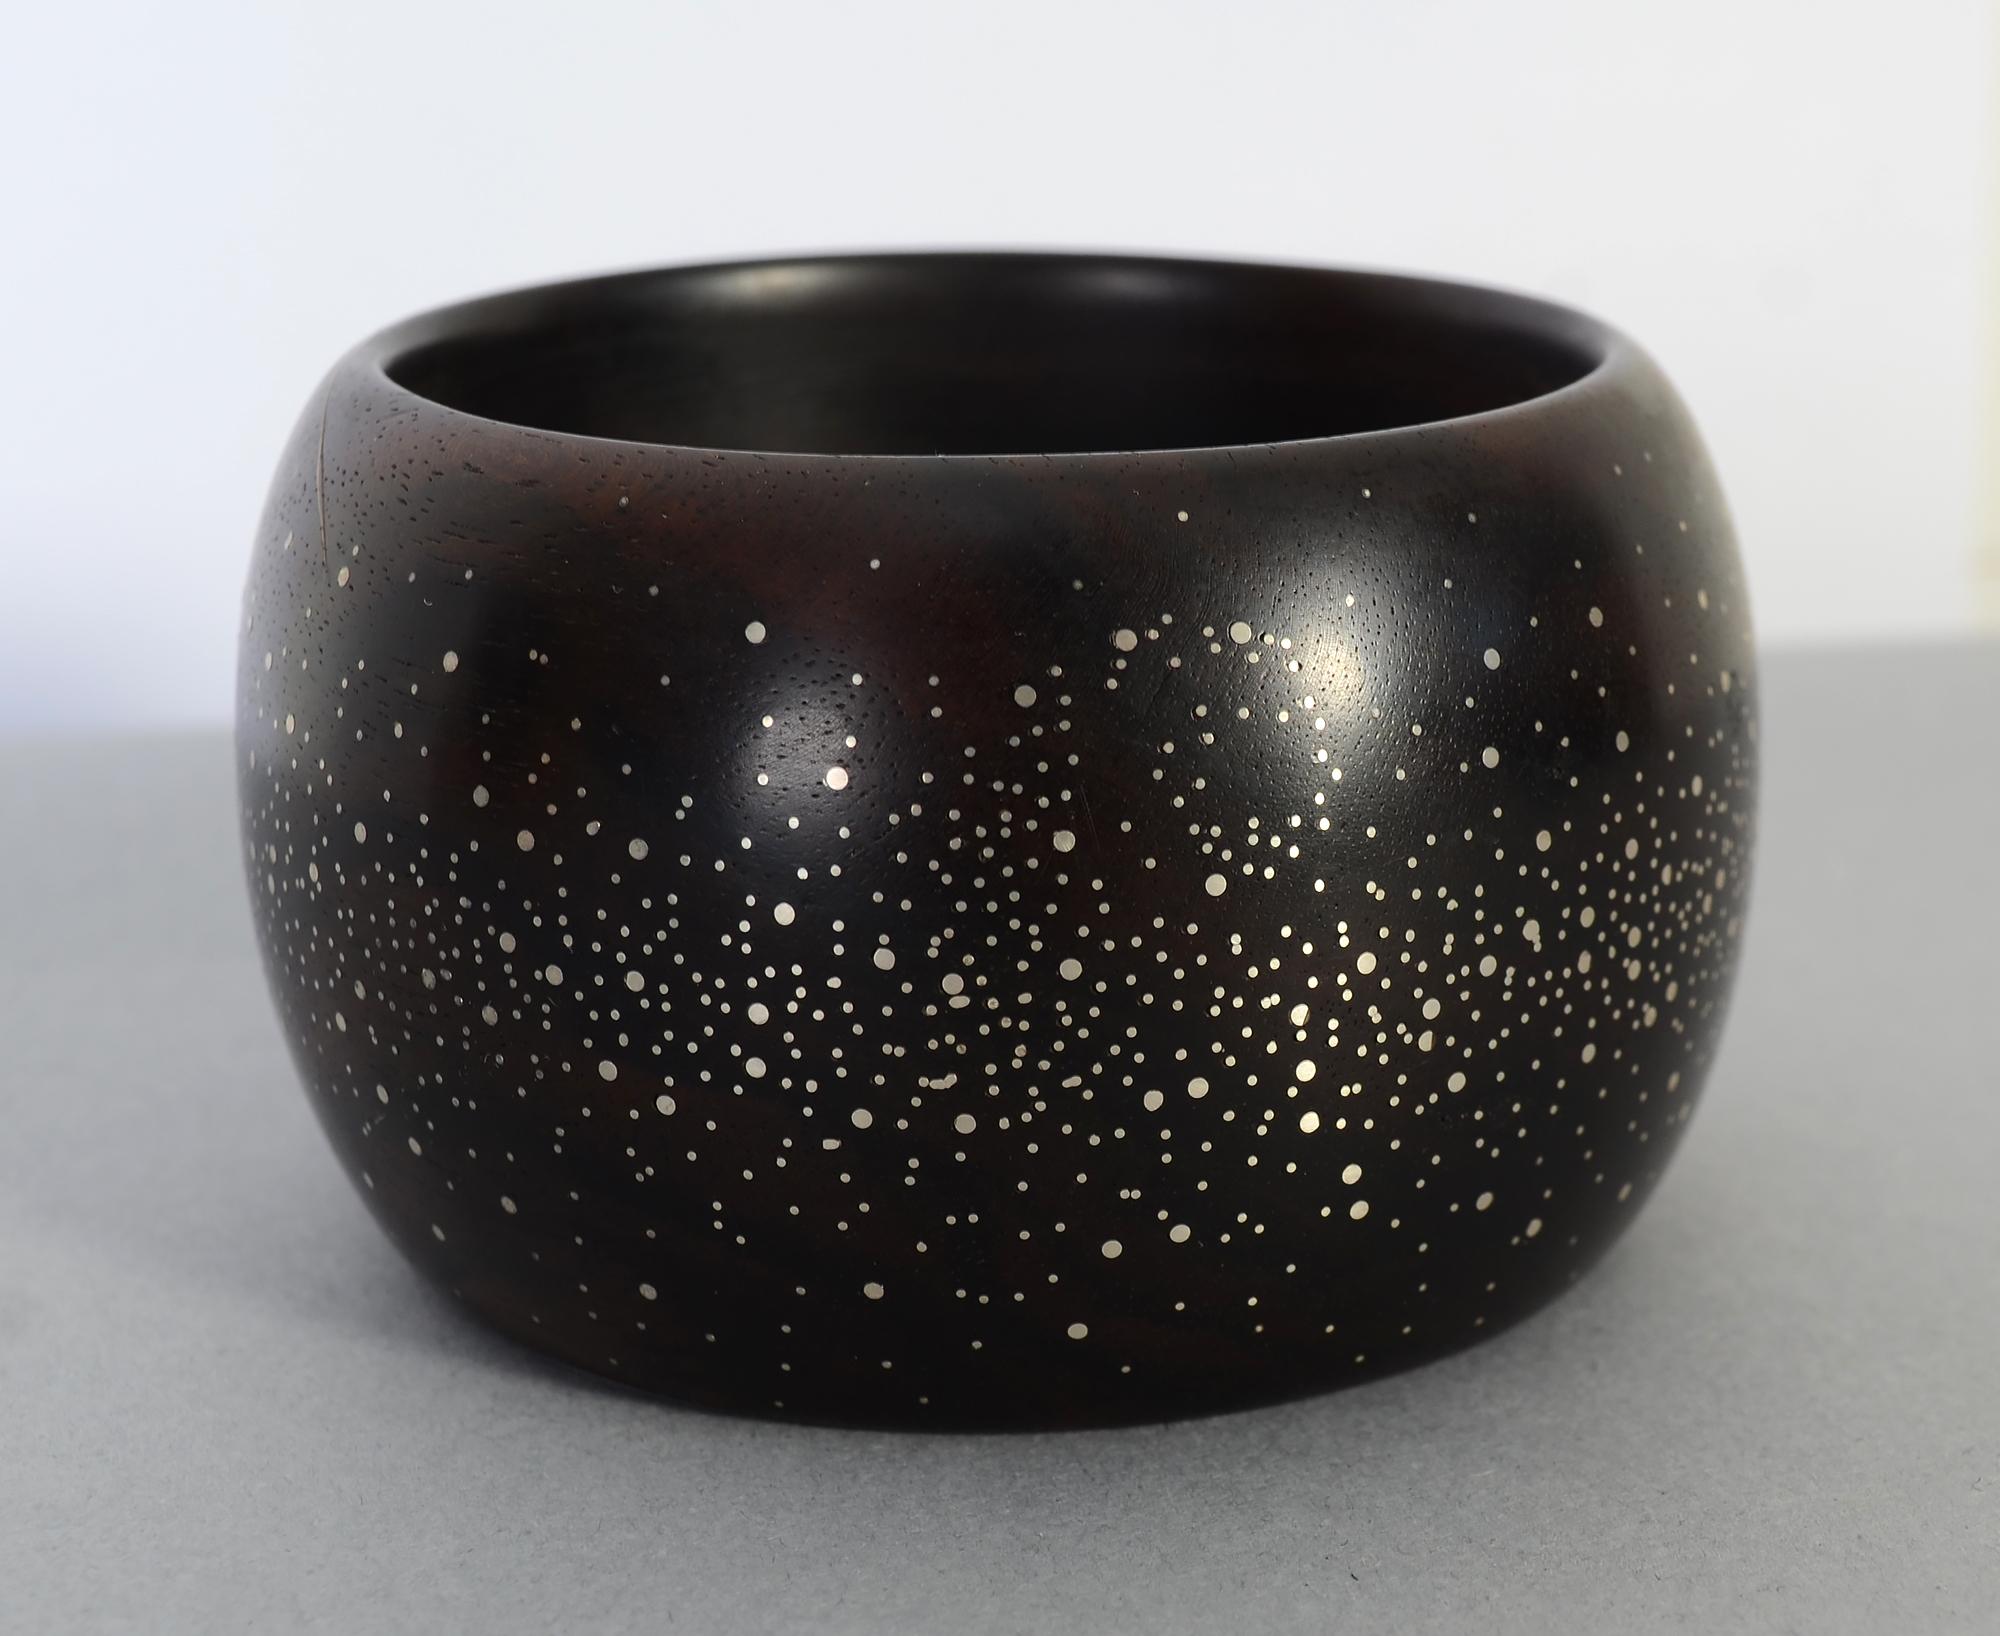 Bold and unusual wide cuff bracelet of ebony impregnated with tiny dots of silver. The bracelet was made by South African jeweler, Vincent Lourens.
The slip on bangle has an inside diameter of 2 5/8 inches. It is 2 1/8 inches from front to back. The